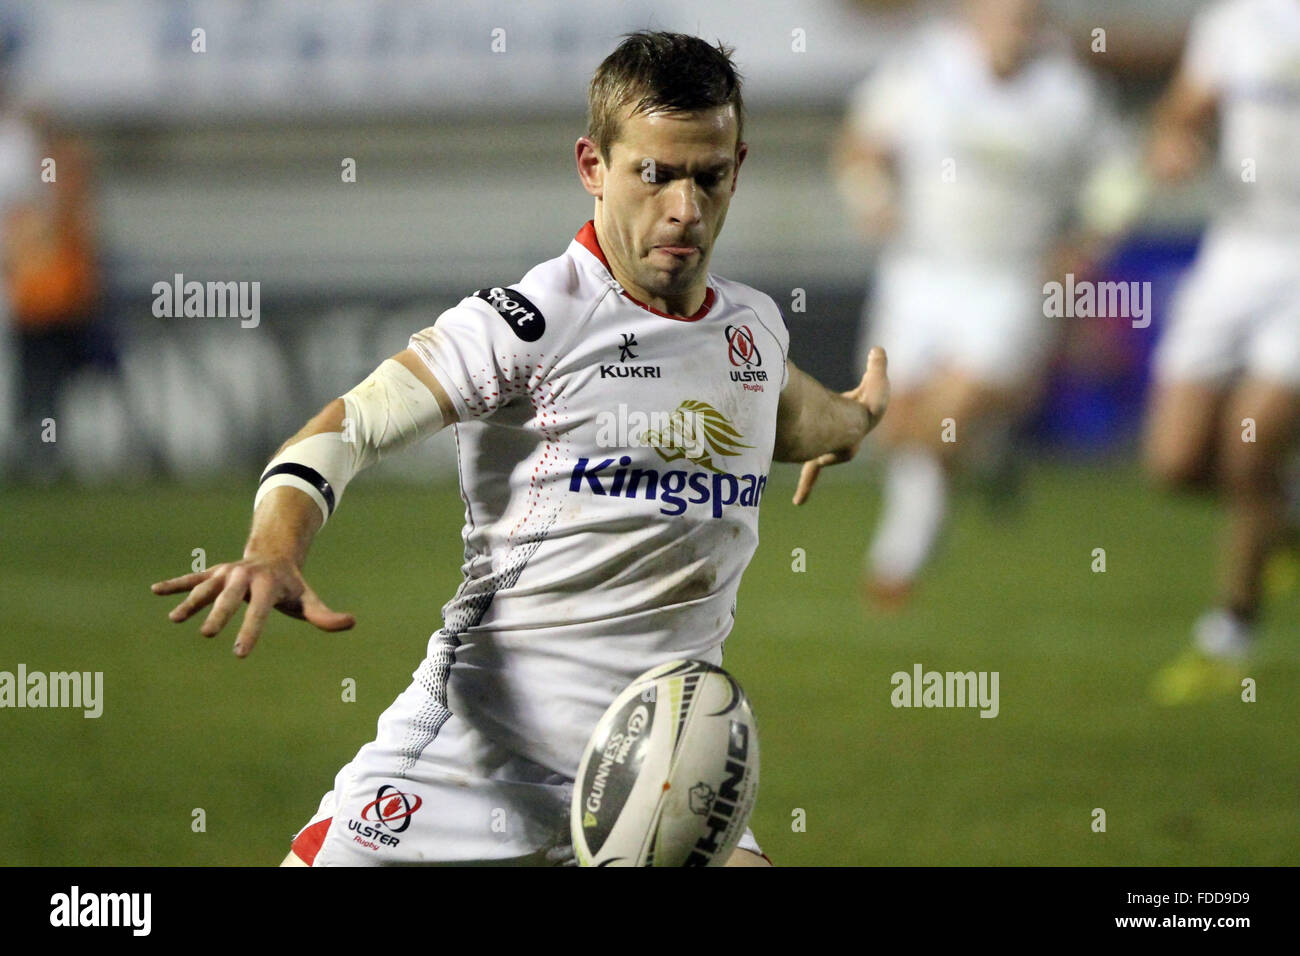 Treviso, Italy. 30th January, 2016. Ulster's player Paul Marshall kicks a ball during Rugby Guinness Pro12 match  between Benetton Treviso and Ulster on 30th January, 2016. Credit:  Andrea Spinelli/Alamy Live News Stock Photo